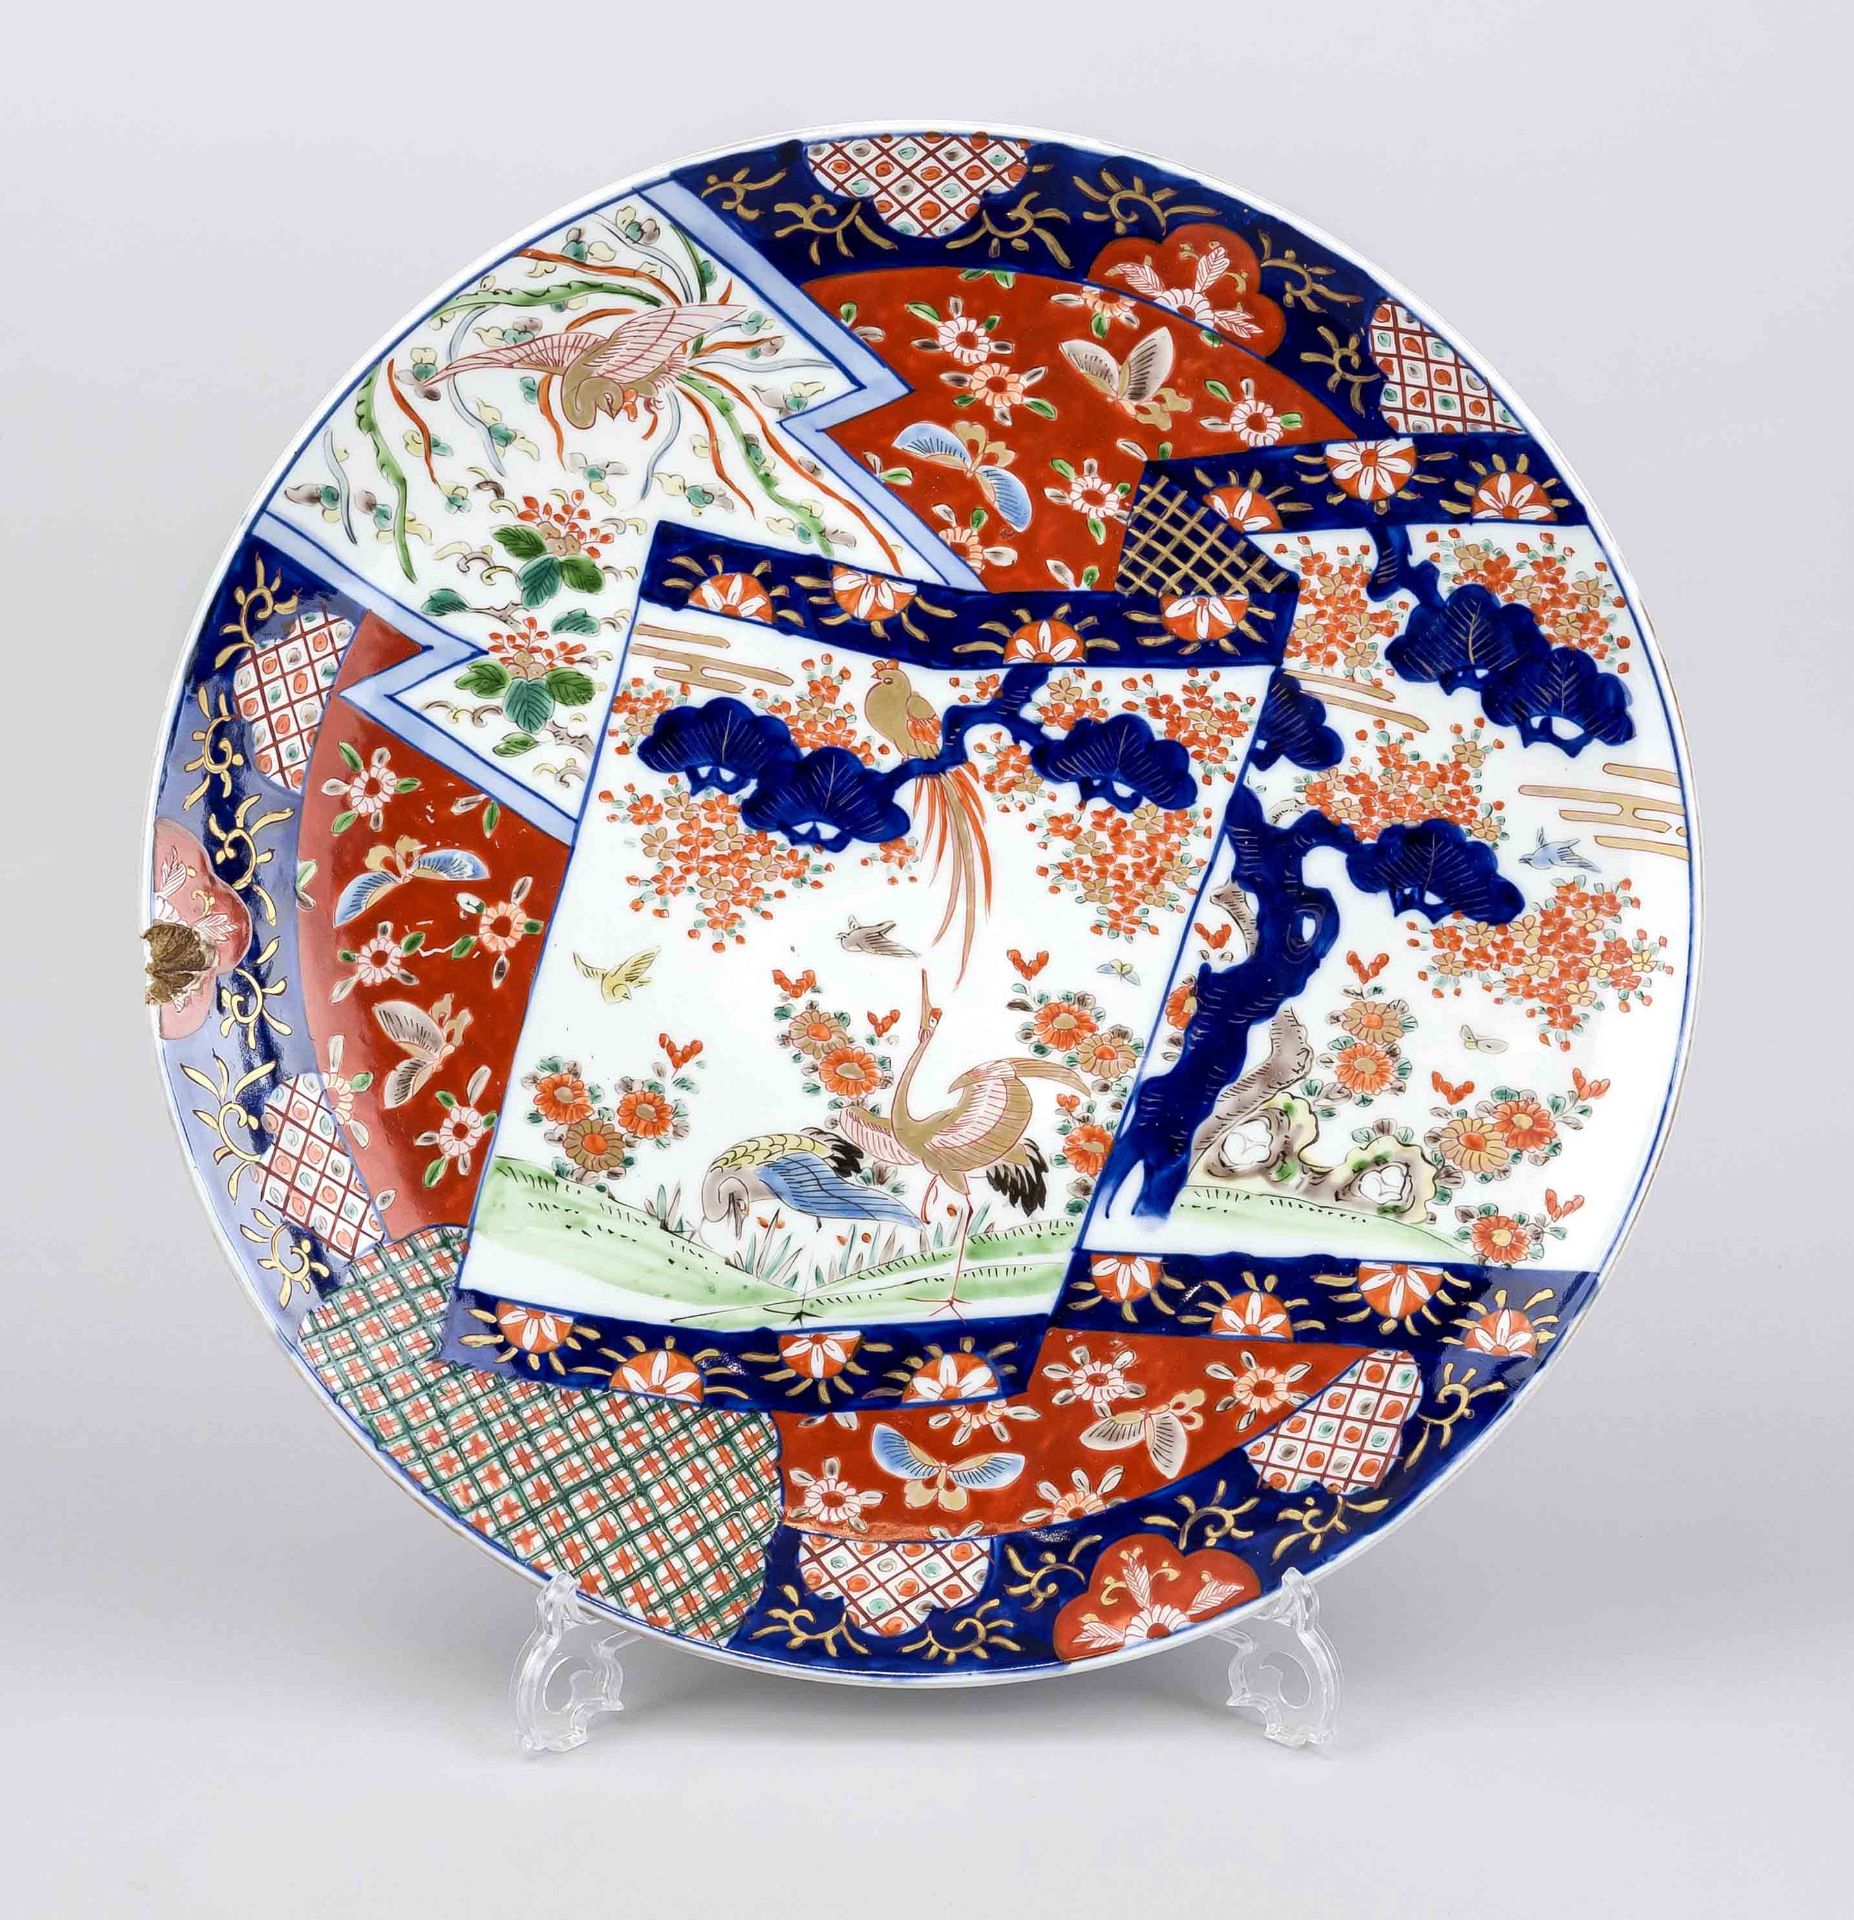 Large Imari plate, Japan 19th century (Meiji). Decorated under and on the glaze in cobalt blue, iron